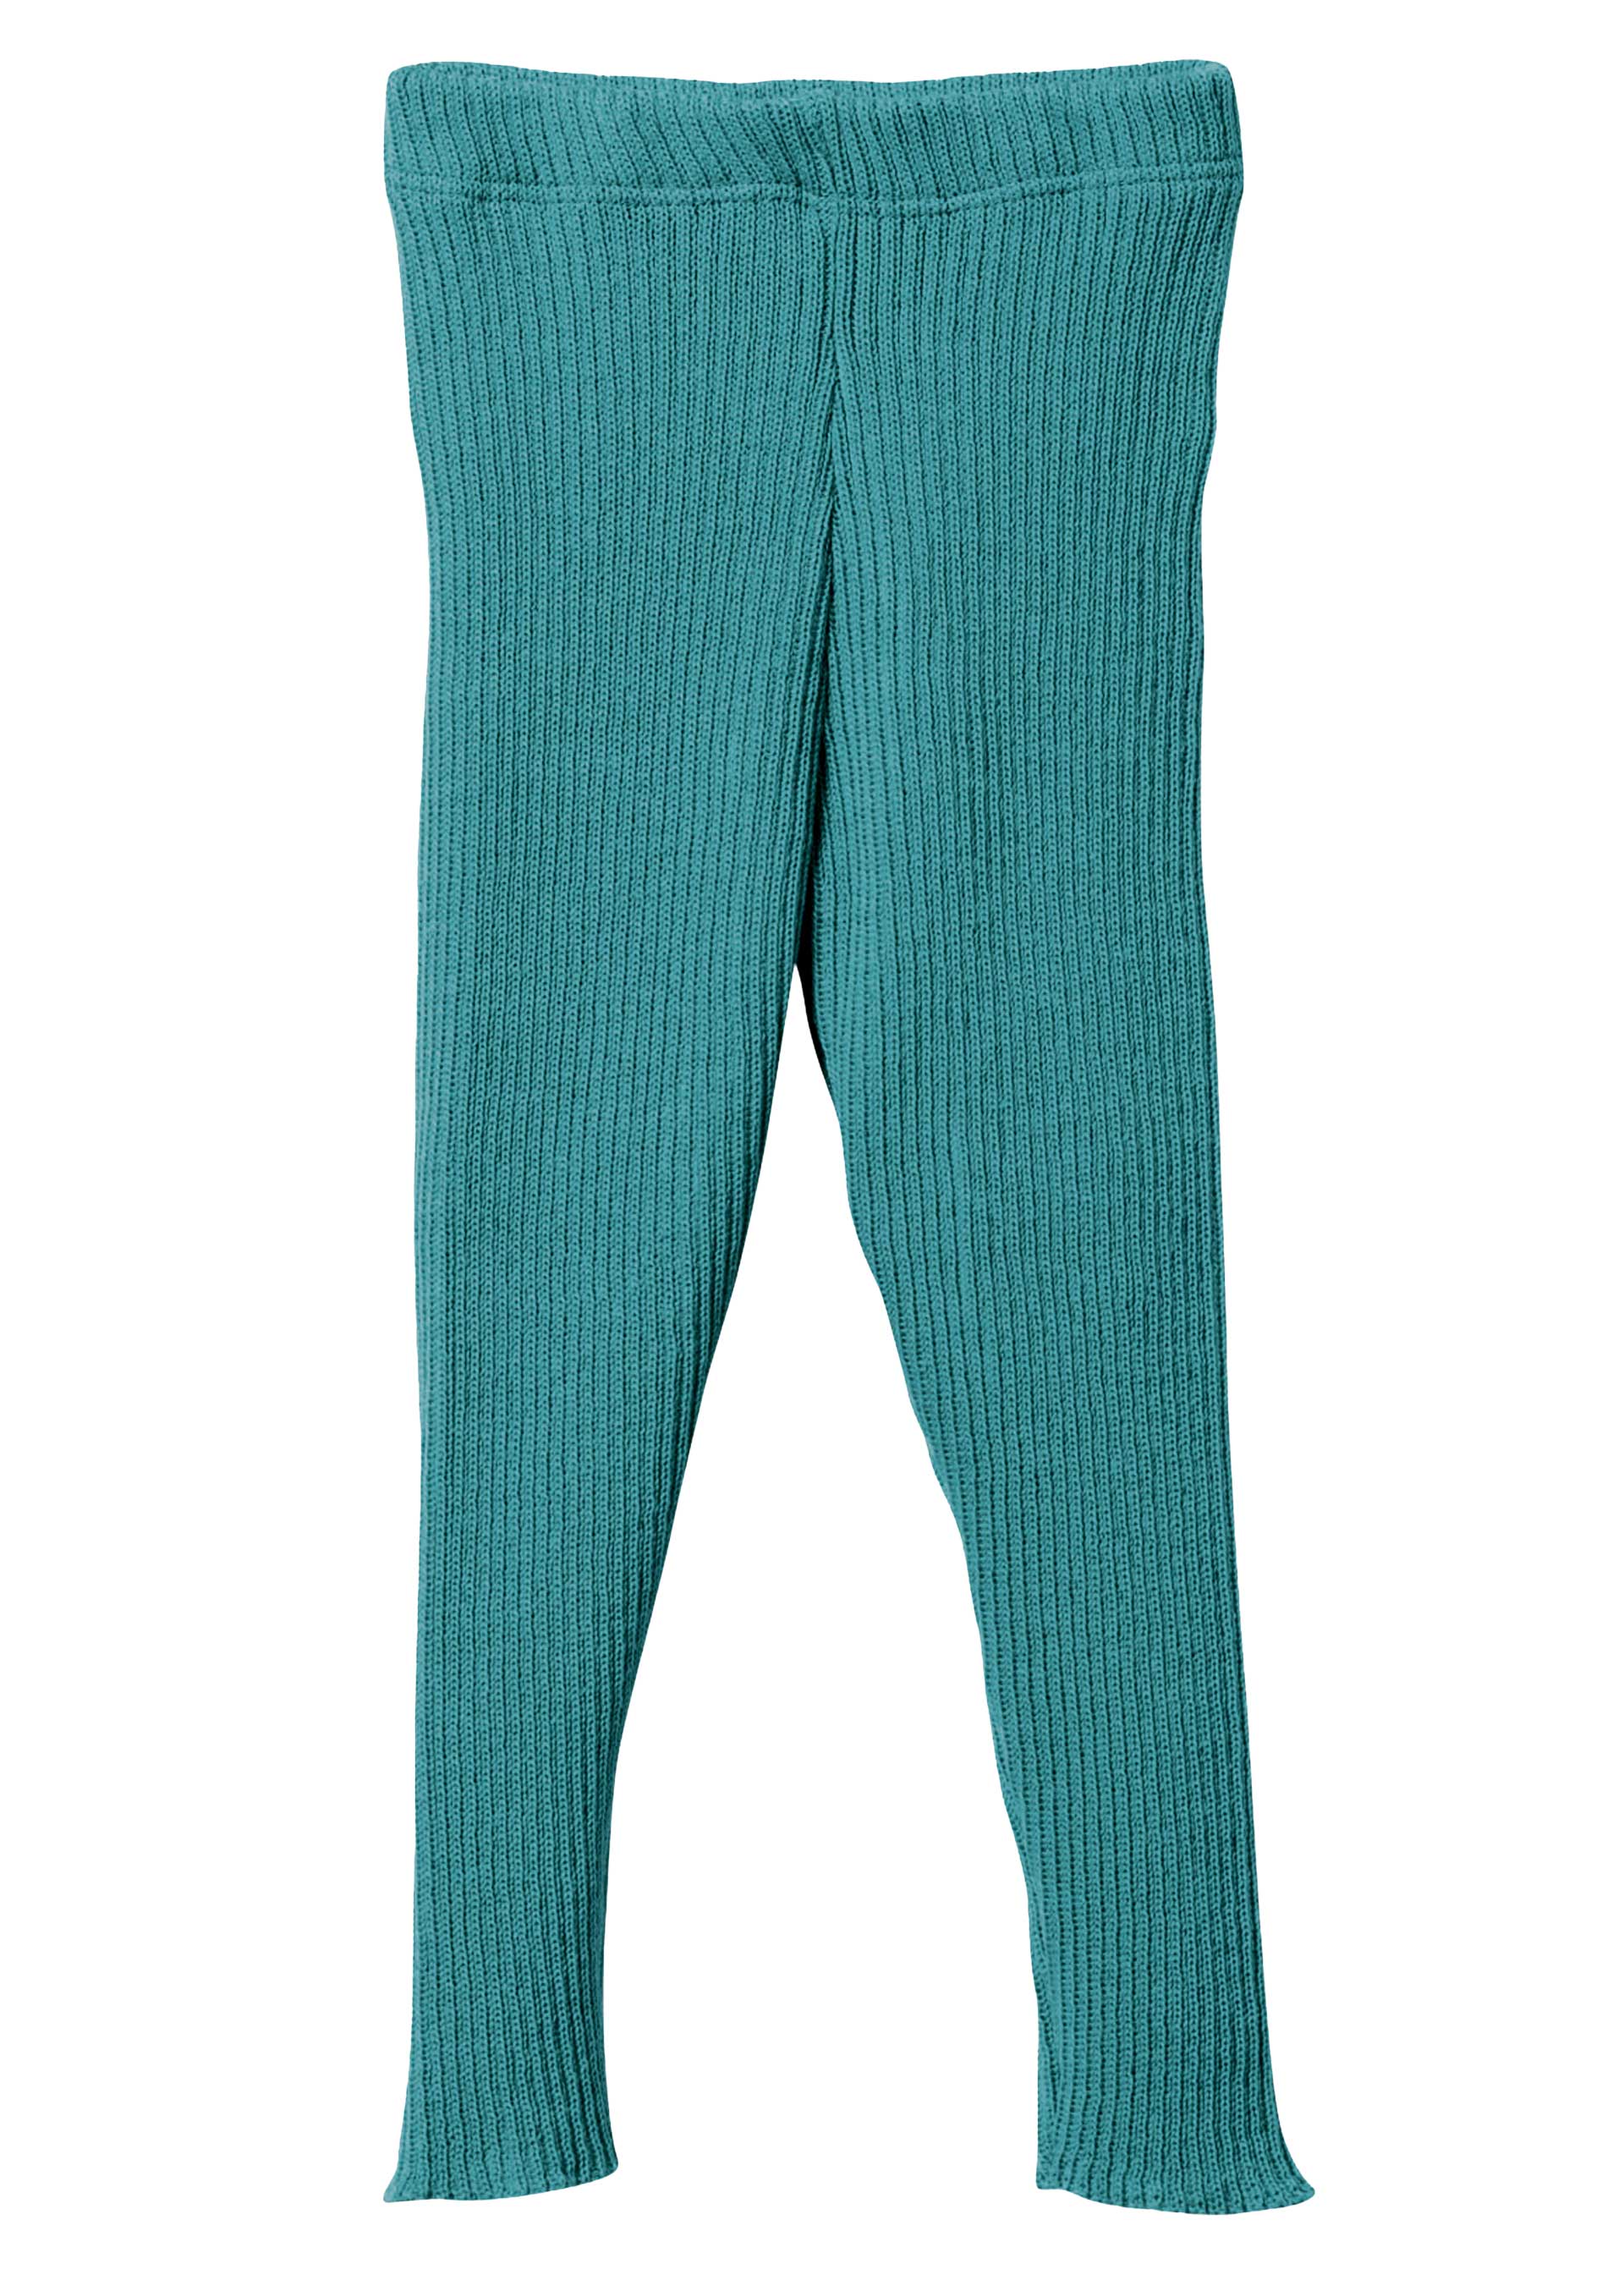 Knitted Leggings - discontinued size